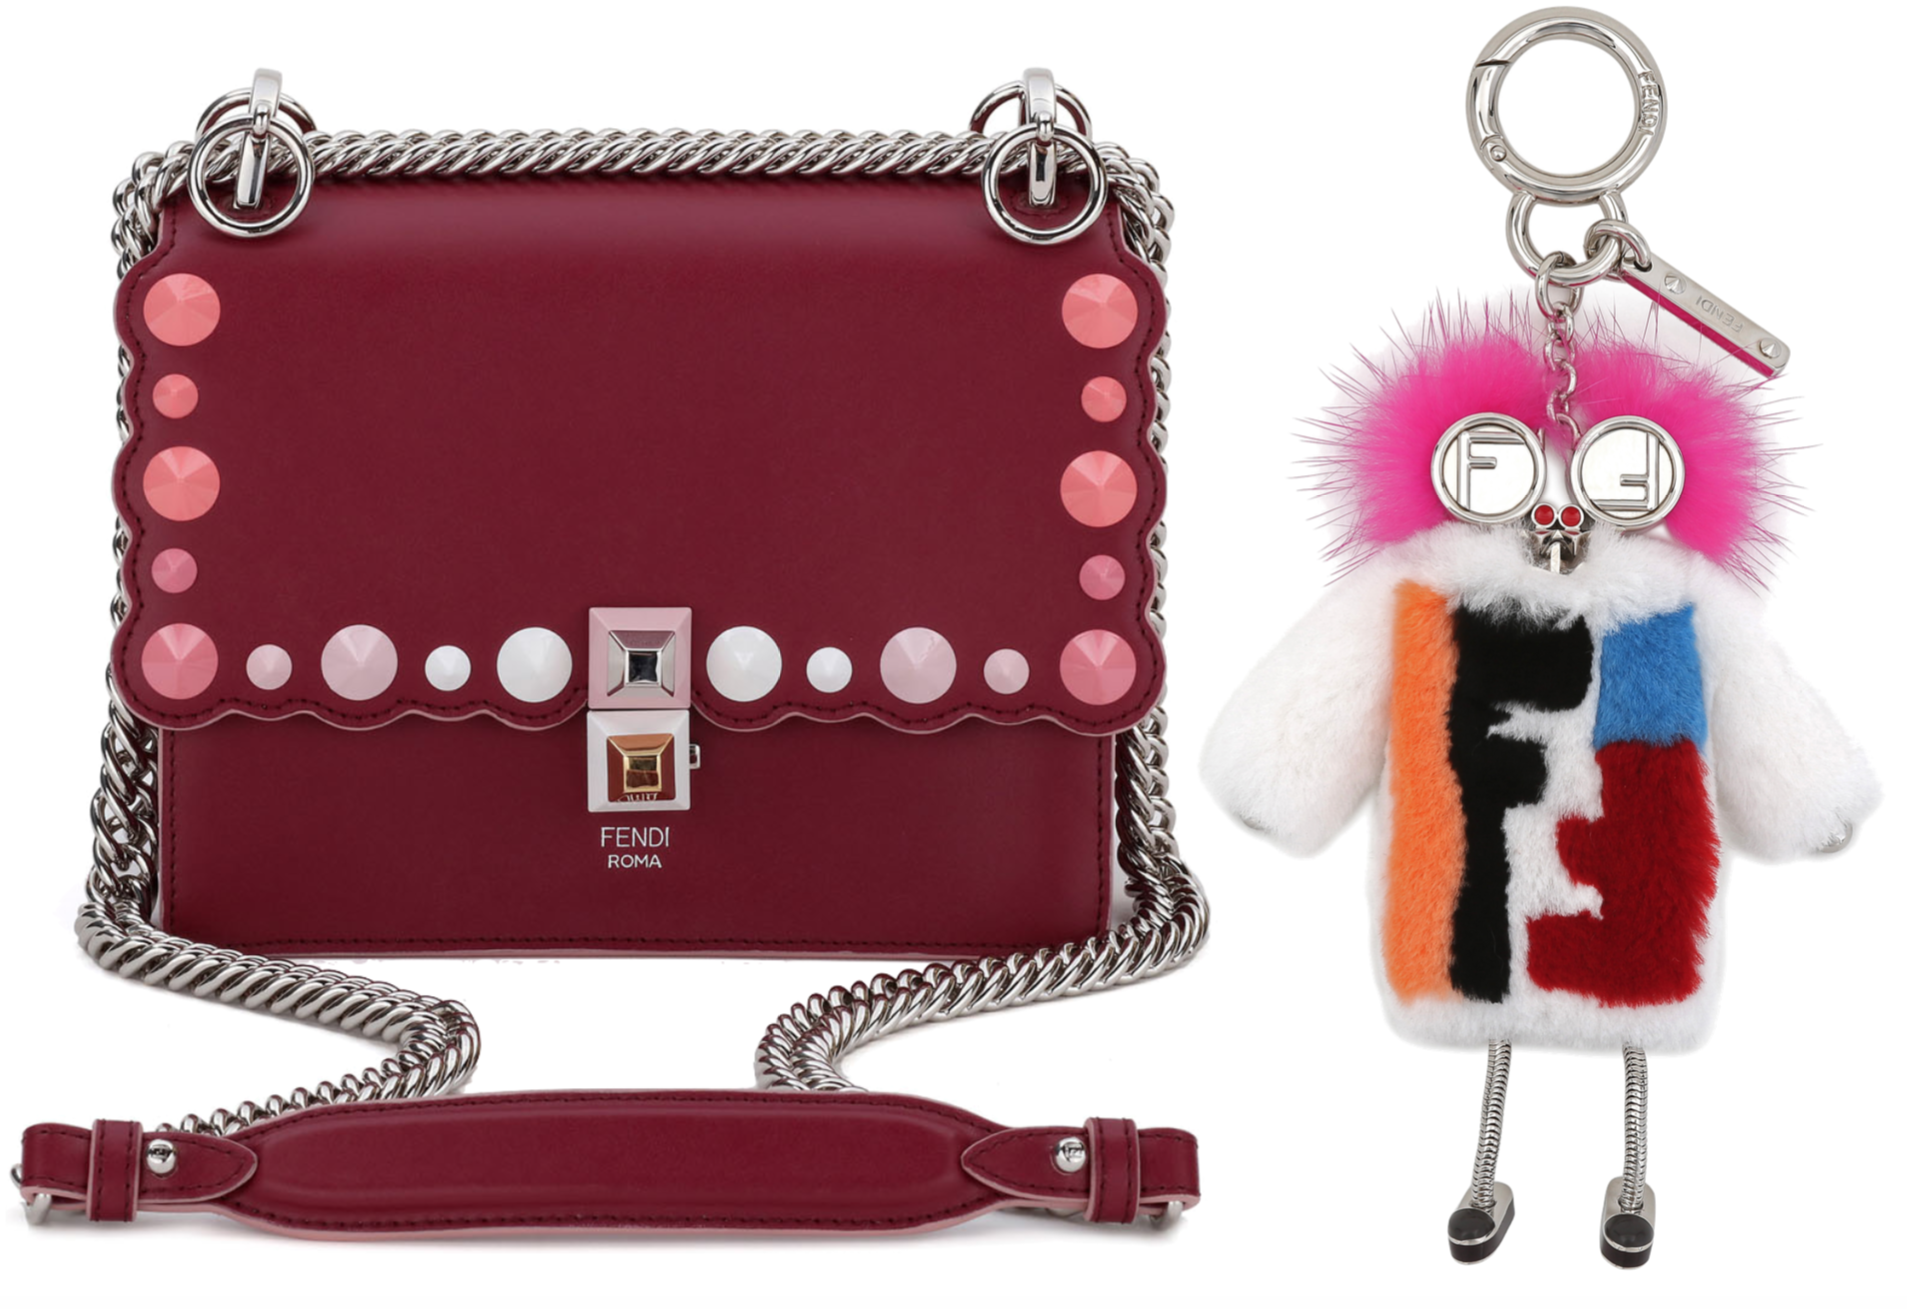 FENDI's Lunar New Year Capsule Collection